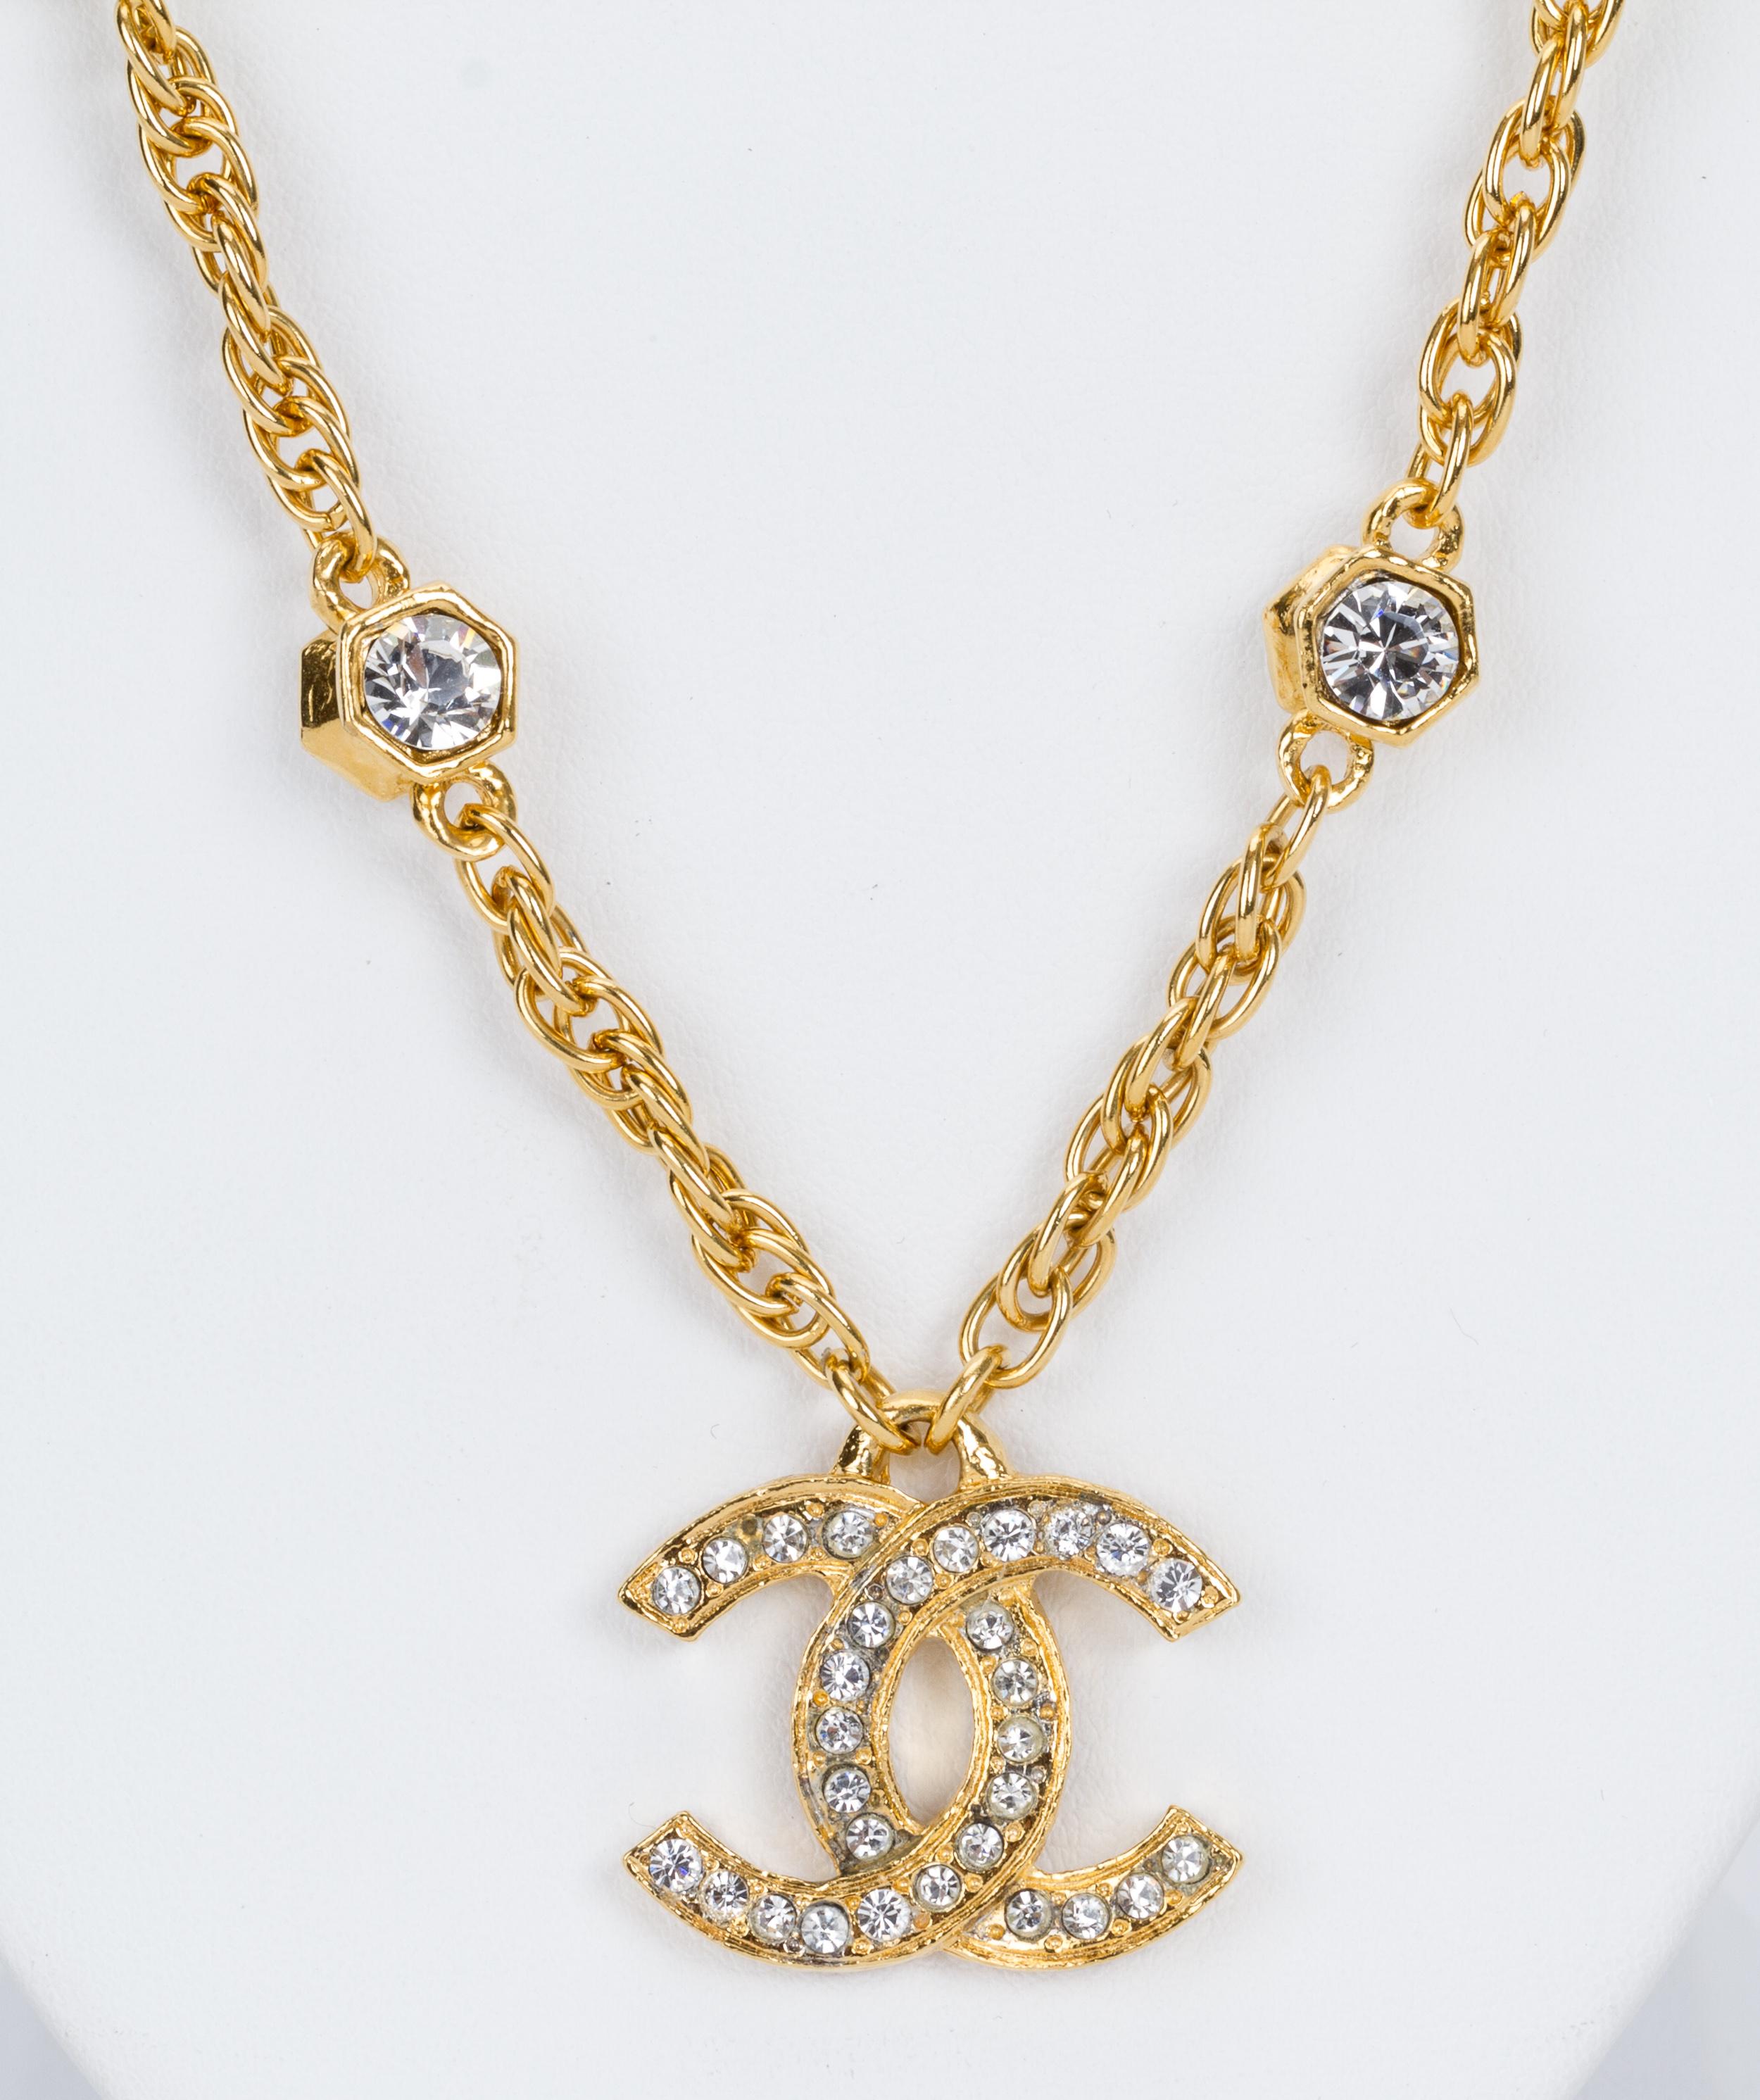 Rare 1970s Chanel rhinestone gold plated CC logo necklace. Excellent vintage condition. Comes with the original box.